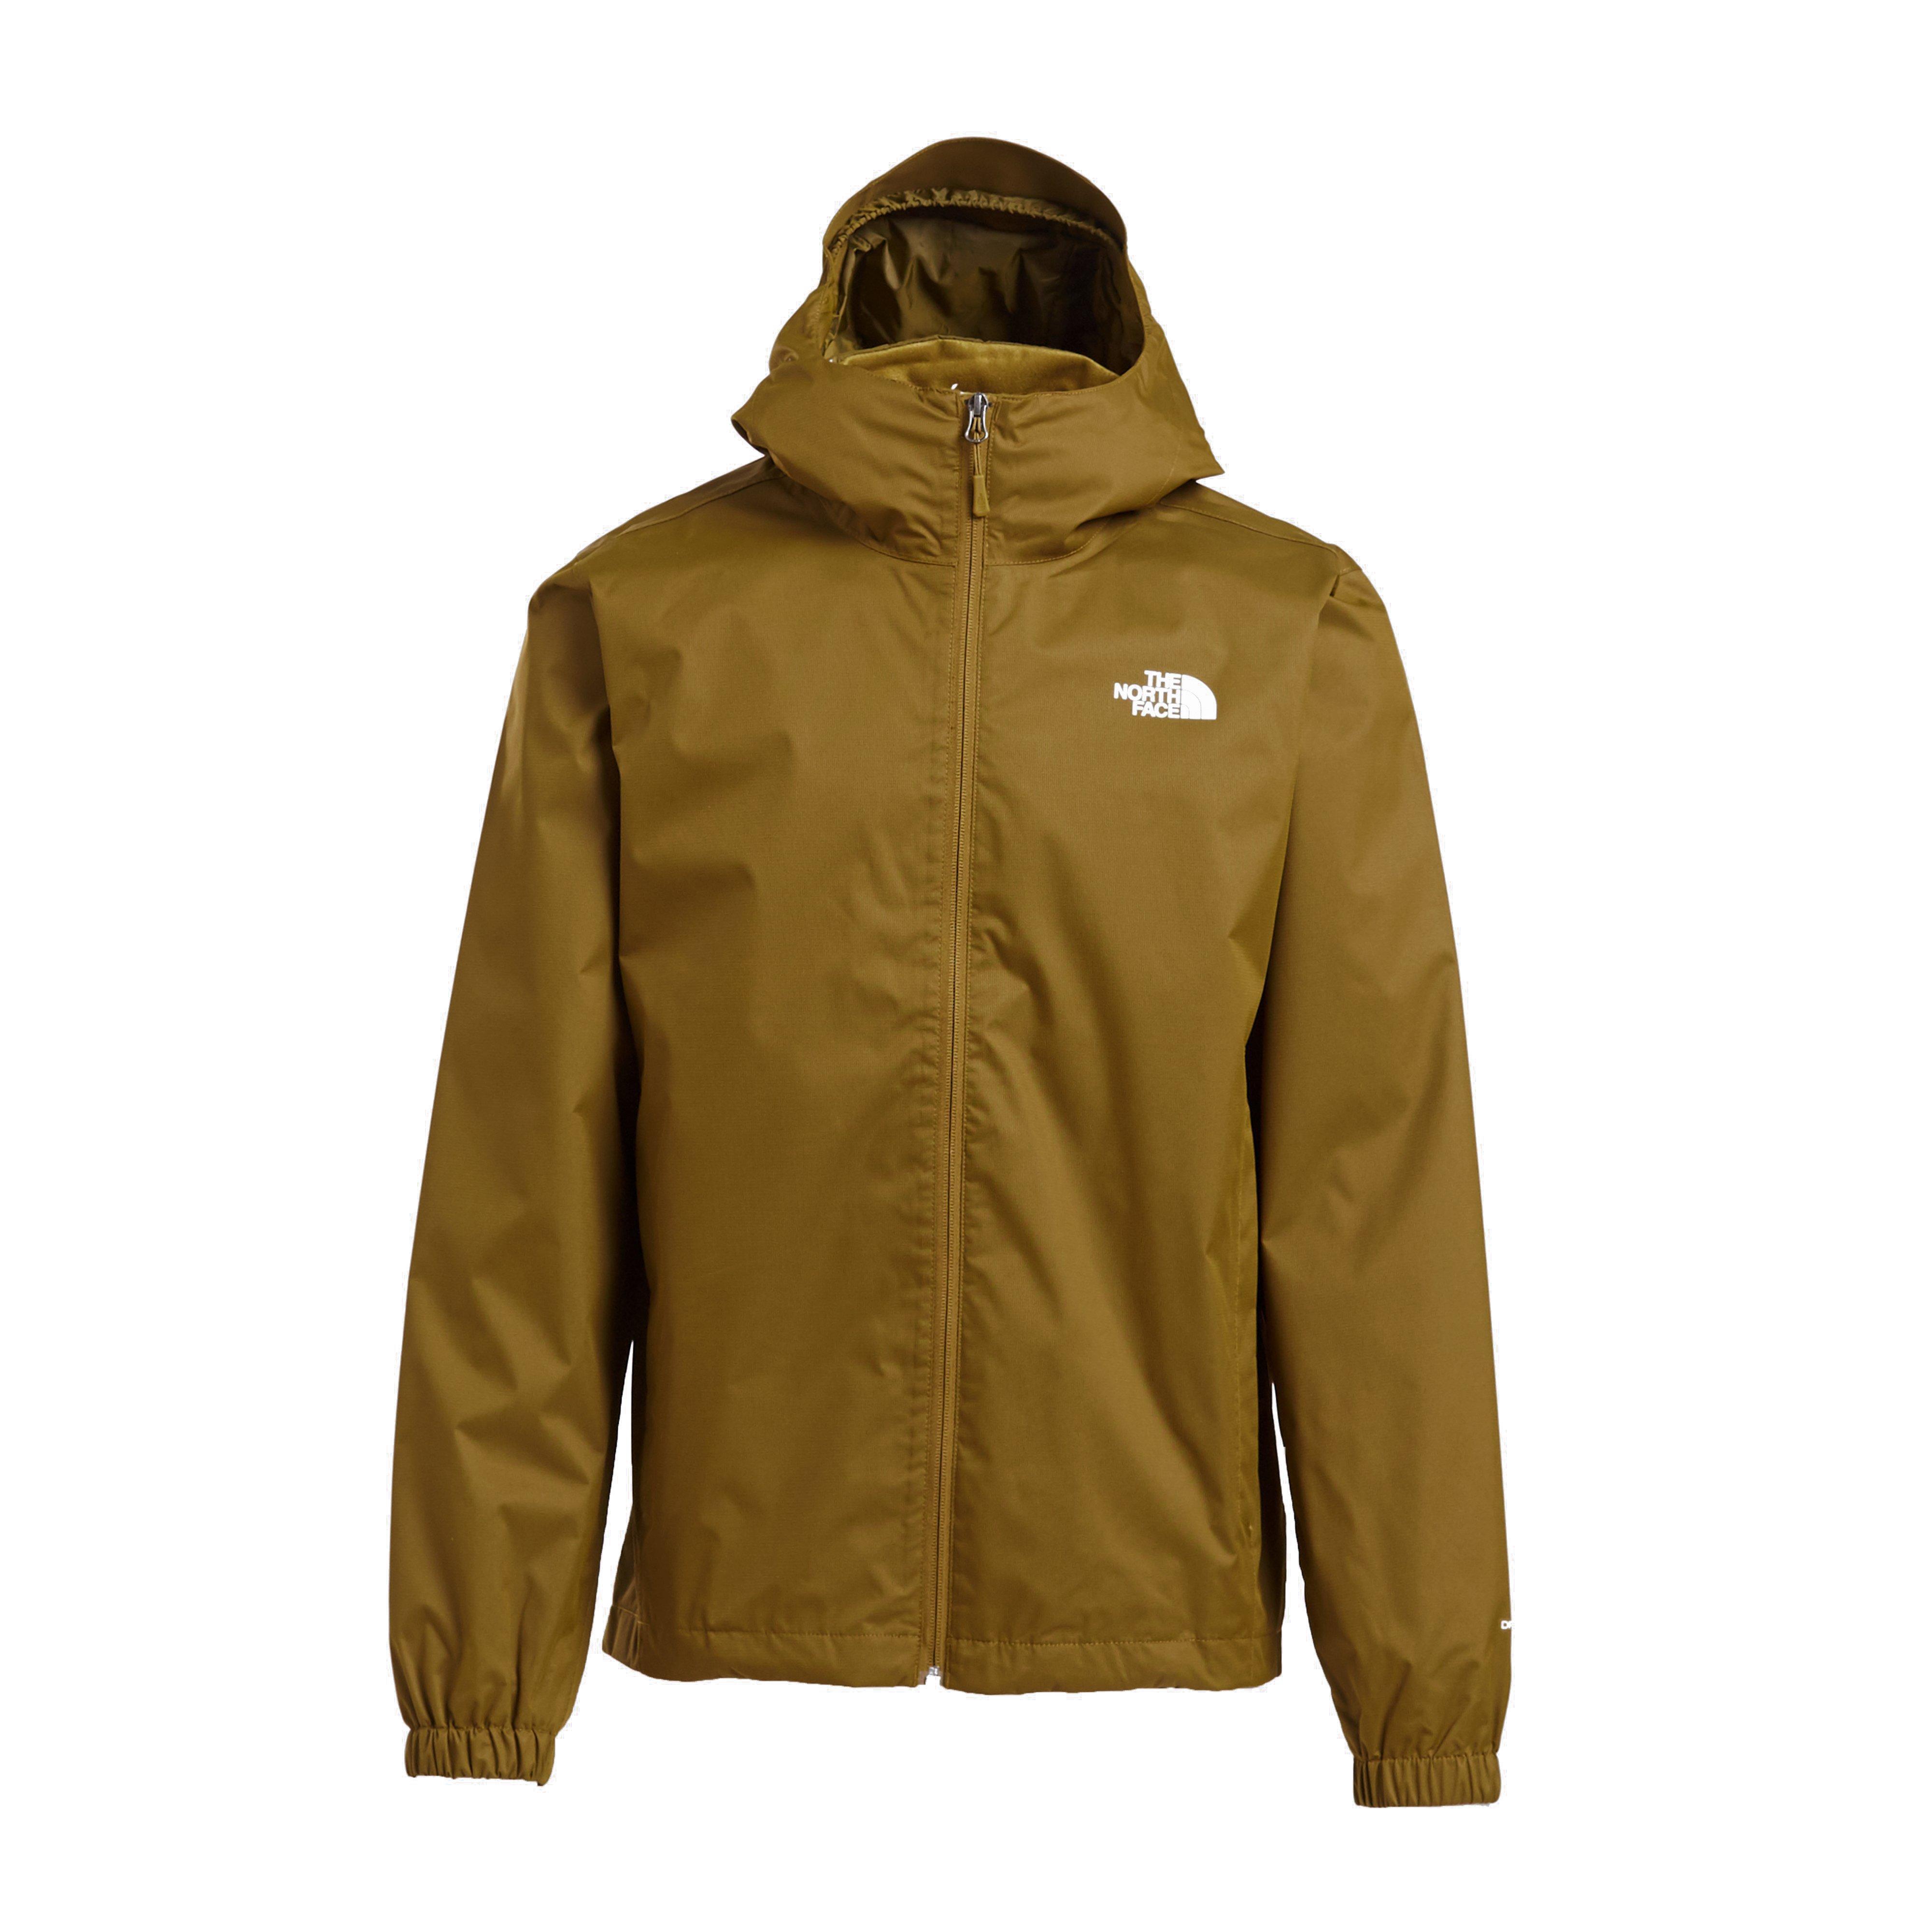 north face water resistant jacket